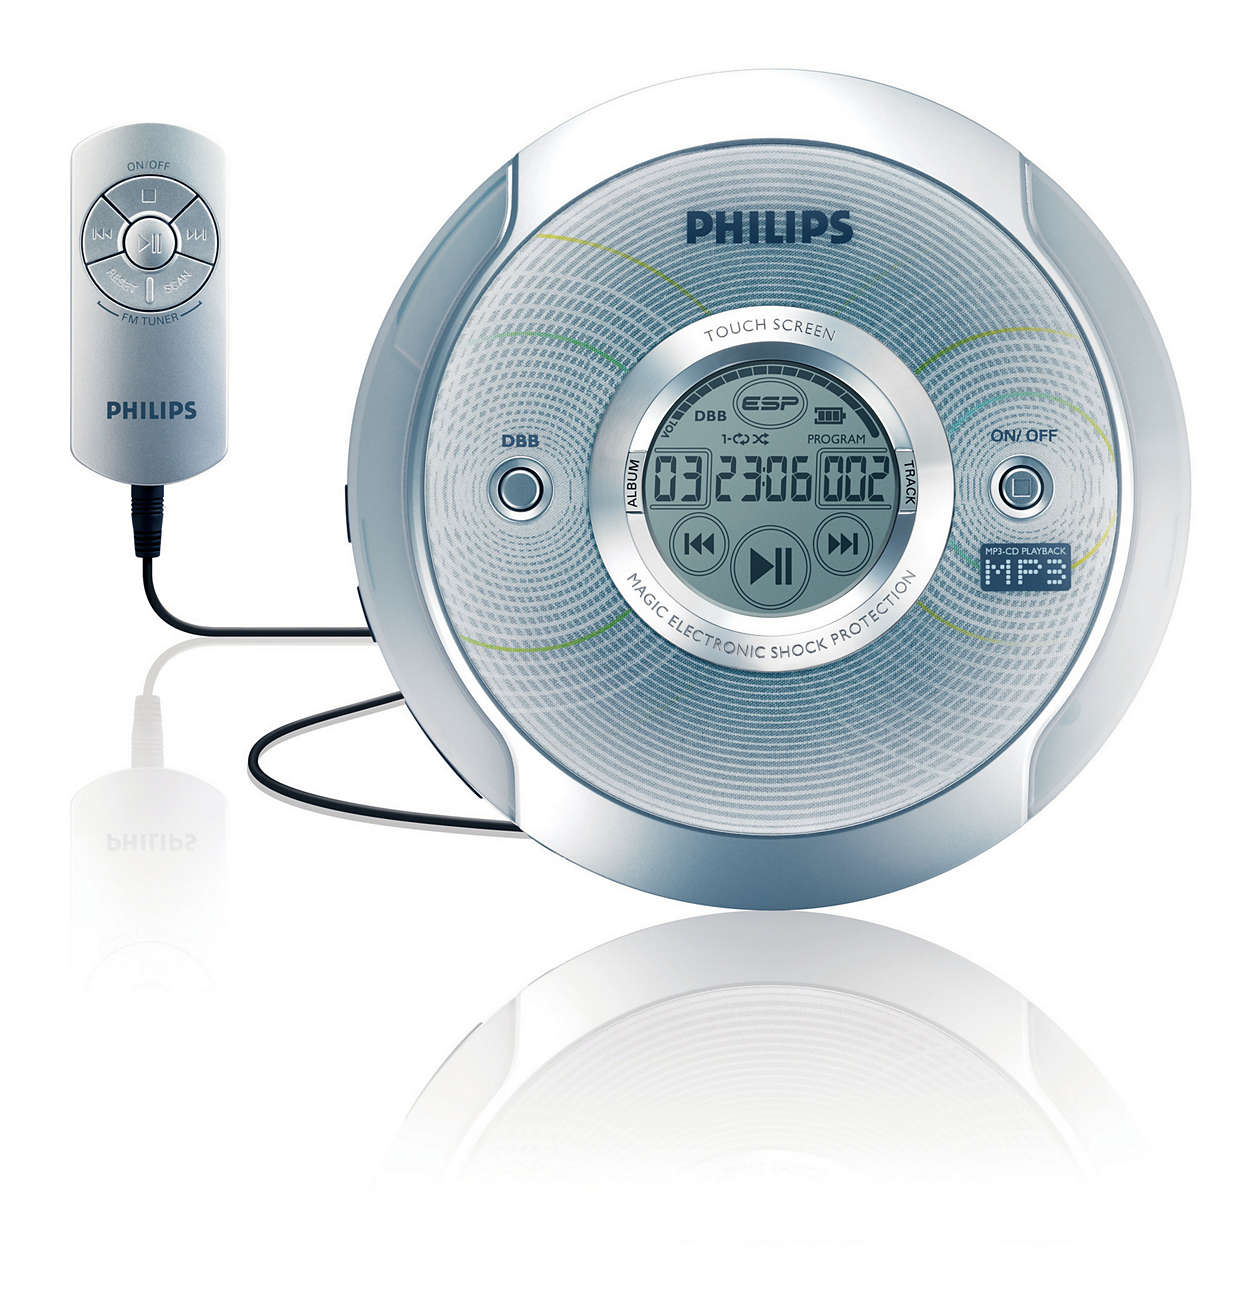 Portable Mp3 Cd Player Exp2581 17 Philips